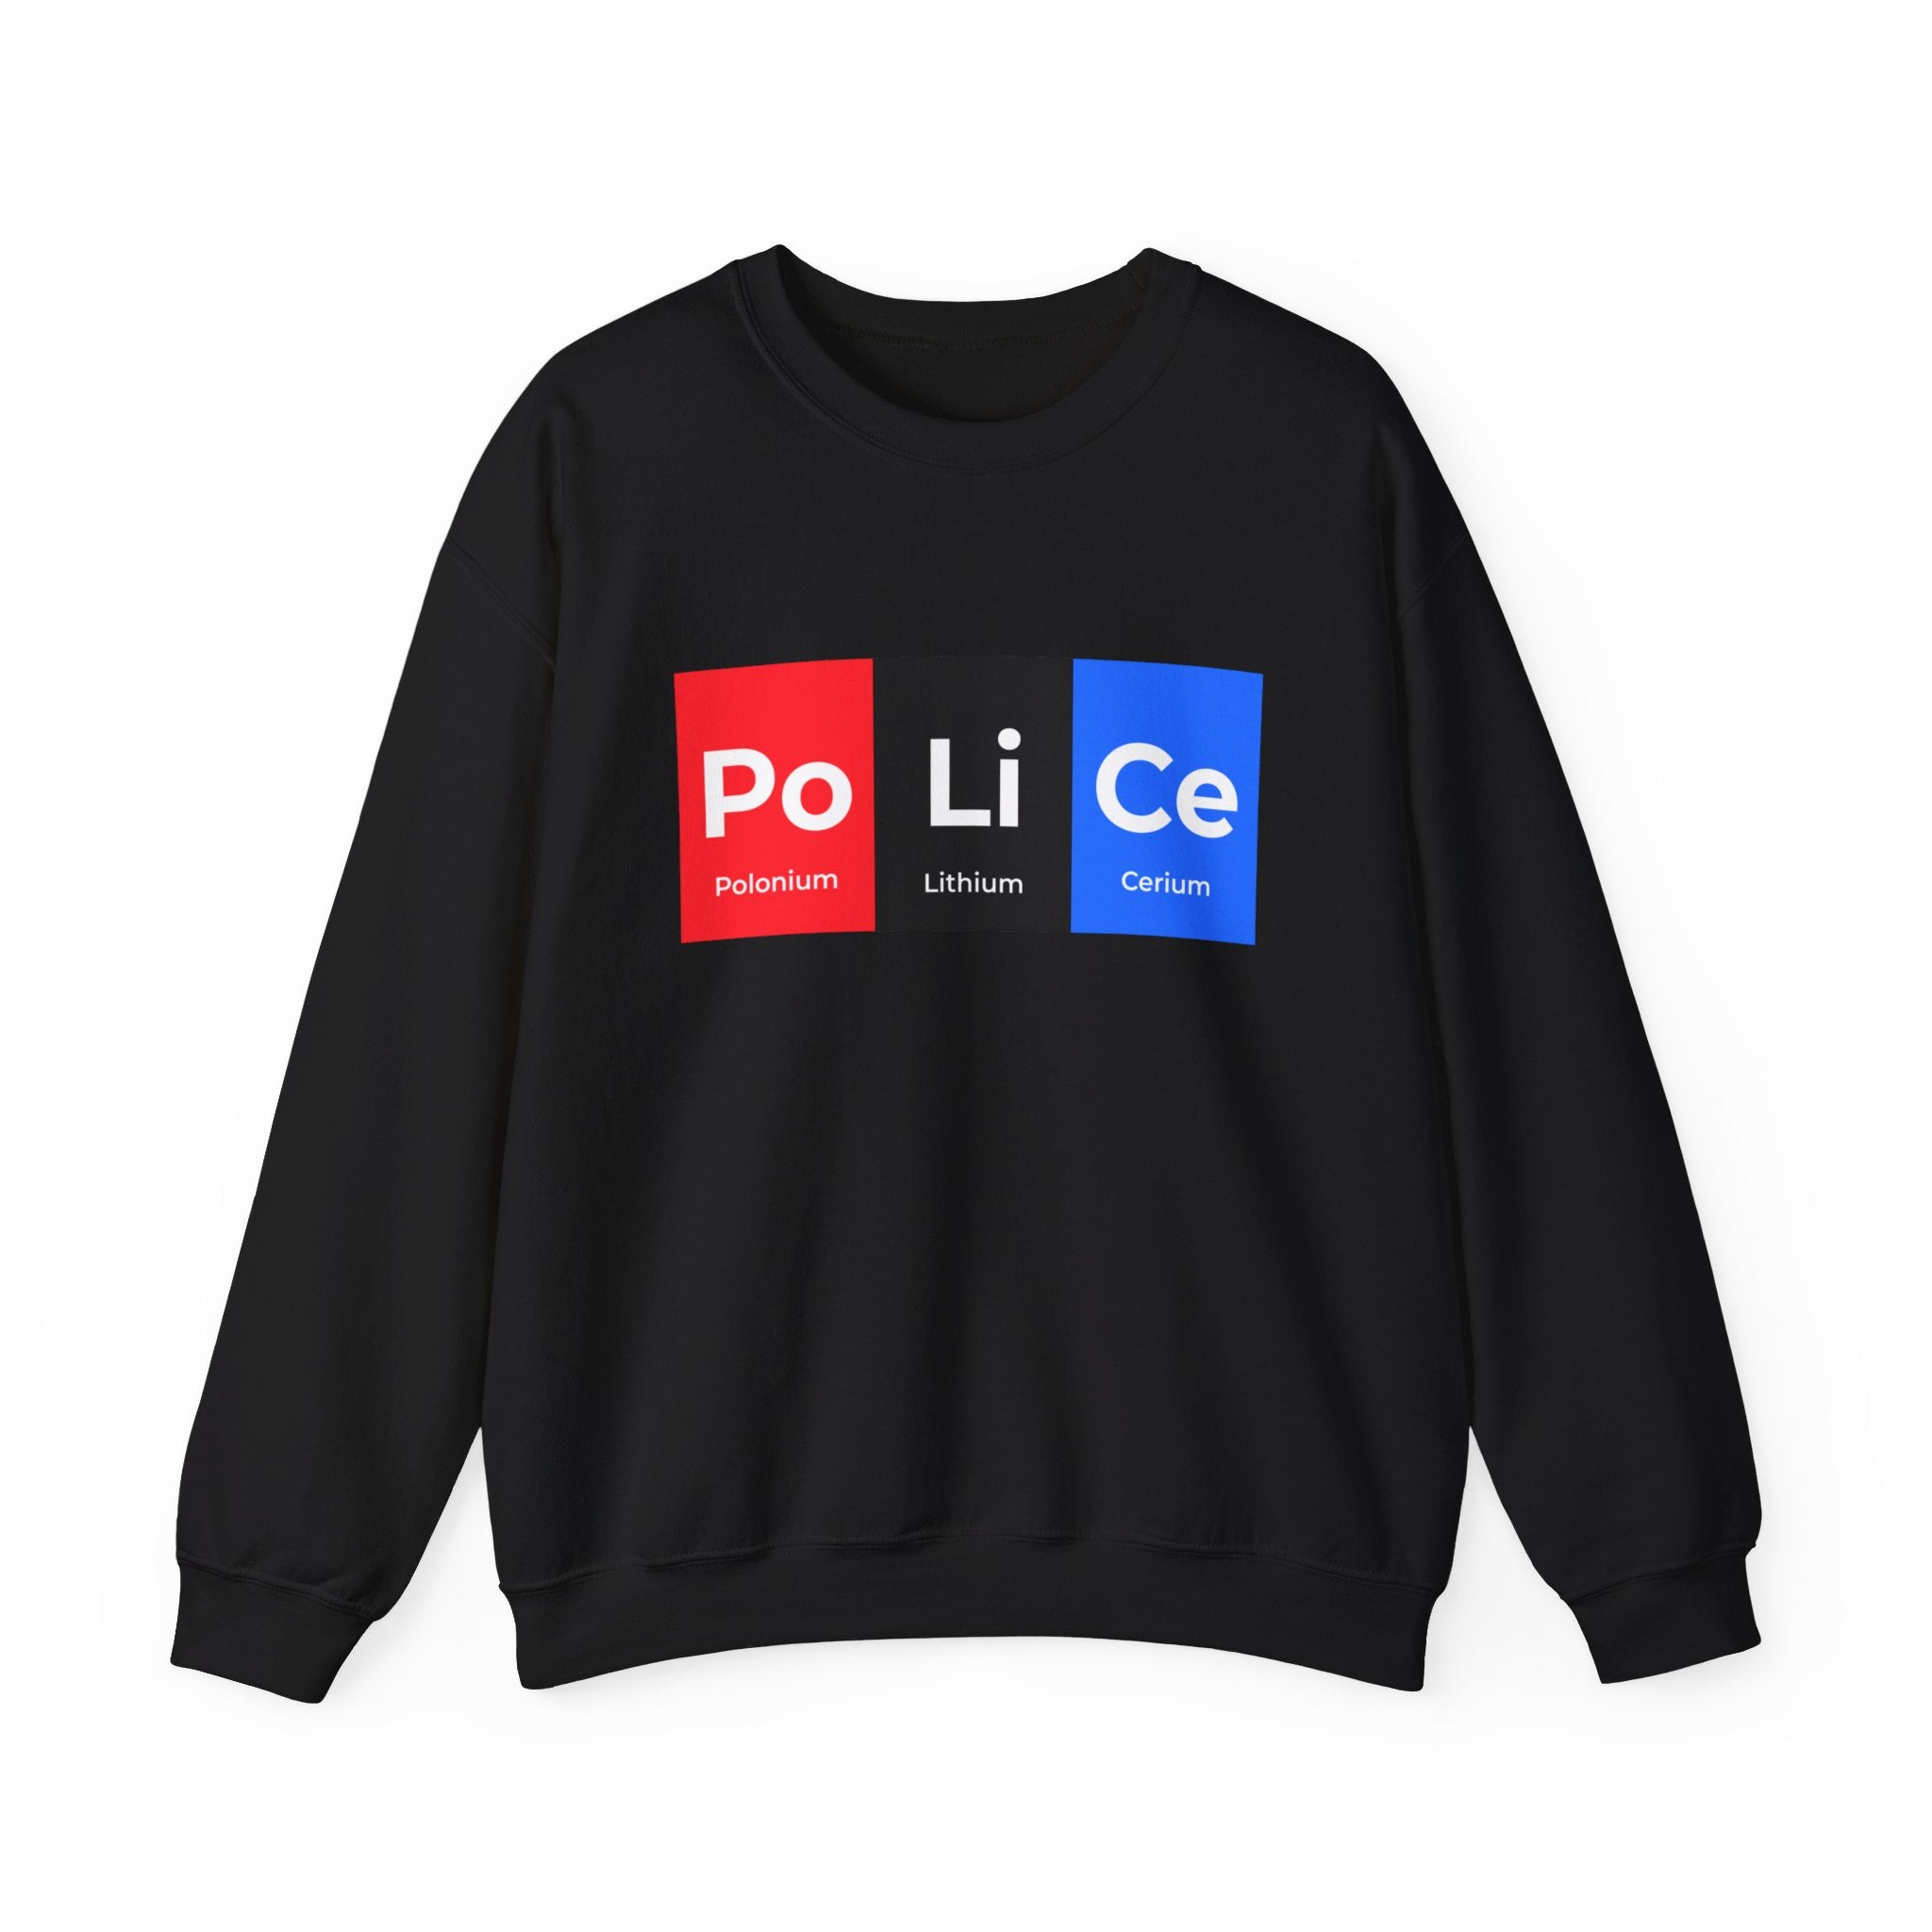 Po-Li-Ce - Sweatshirt featuring a cozy Po-Li-Ce design with the elements Polonium (Po), Lithium (Li), and Cerium (Ce) arranged to spell "Police" in red, white, and blue blocks, combining comfort and style effortlessly.